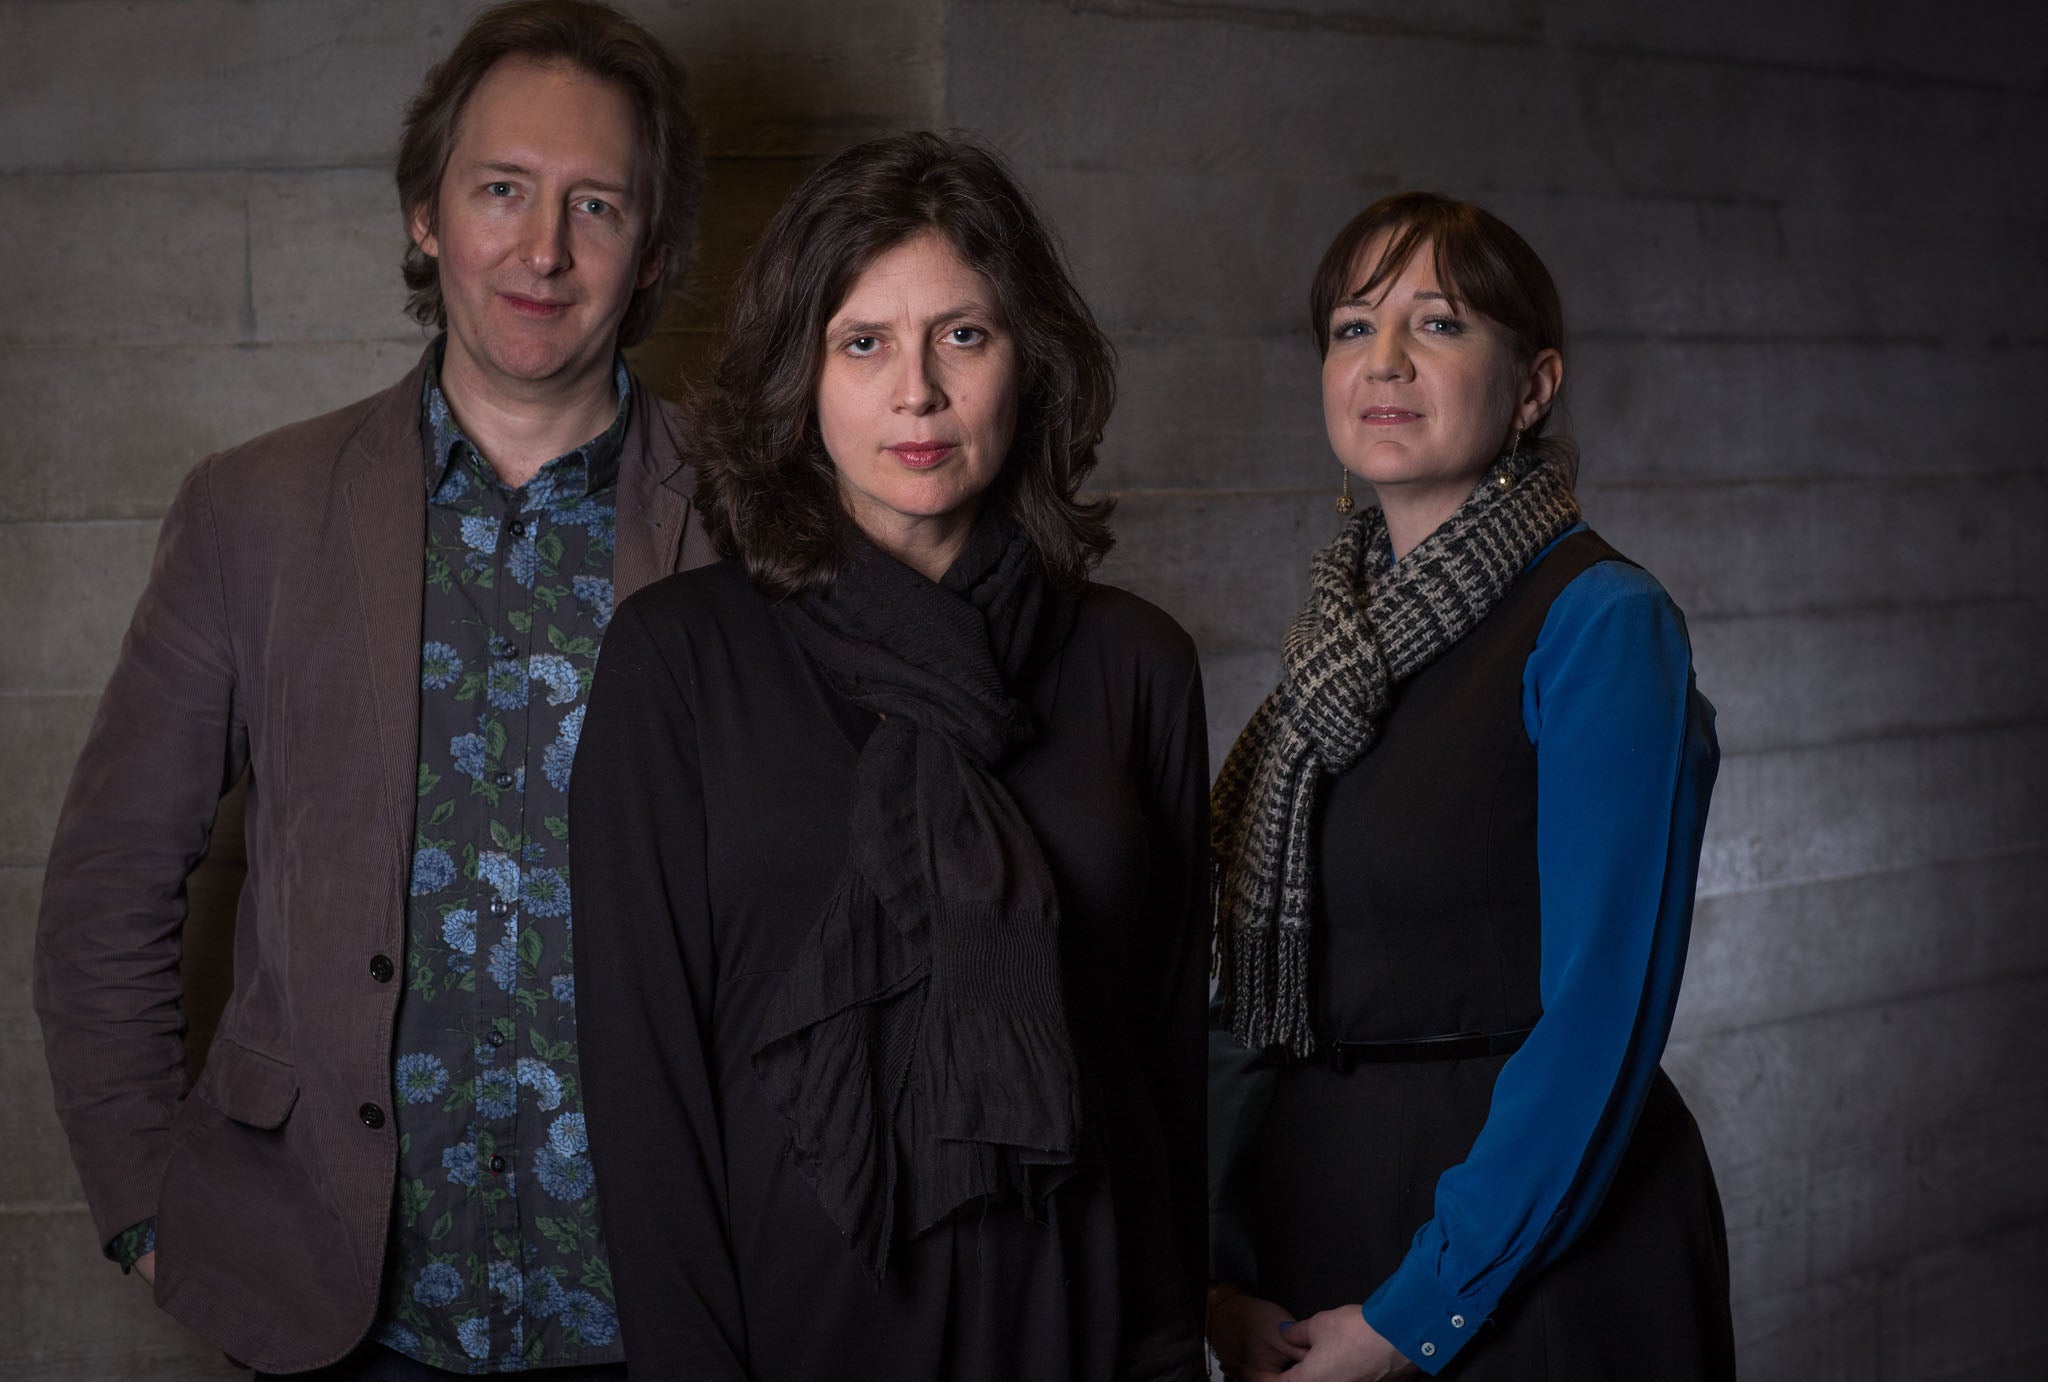 Jonathan Church, Artistic Director, Chichester Festival Theatre; Josie Rourke, Artistic Director, Donmar Warehouse and Erica Whyman, Deputy Artistic Director, Royal Shakespeare Company.